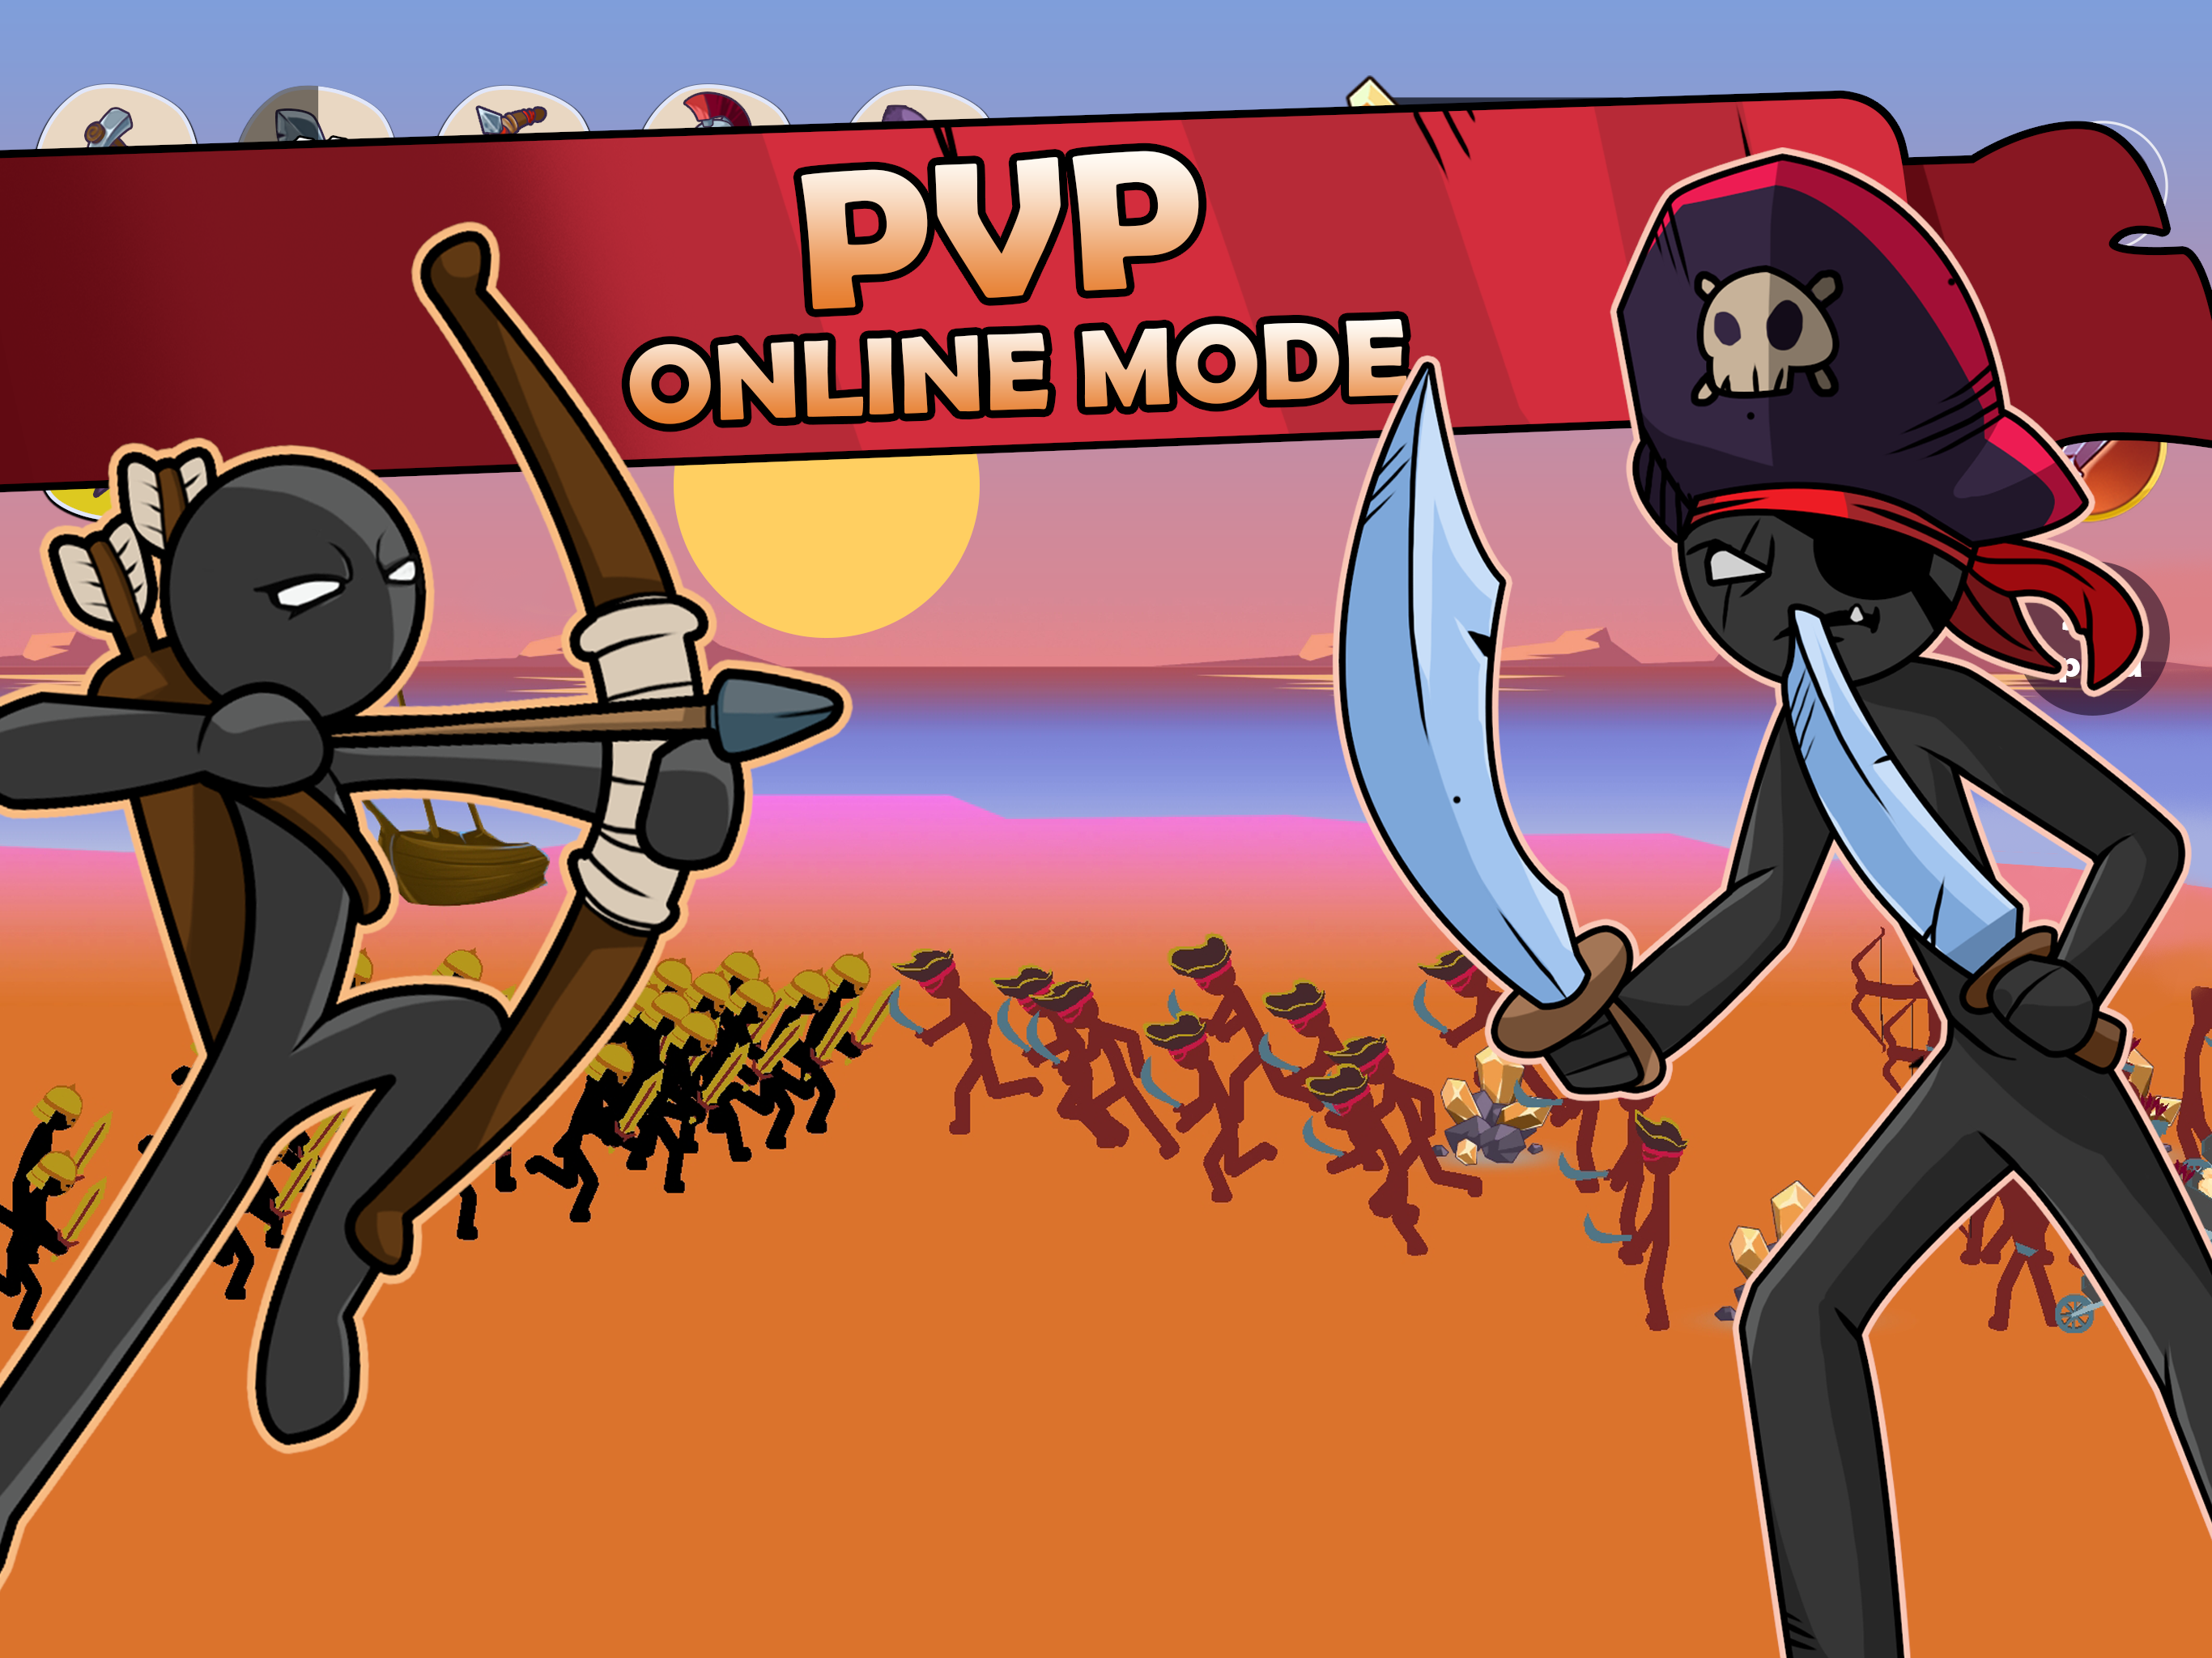 Download Stickman War : Infinity battle (MOD) APK for Android